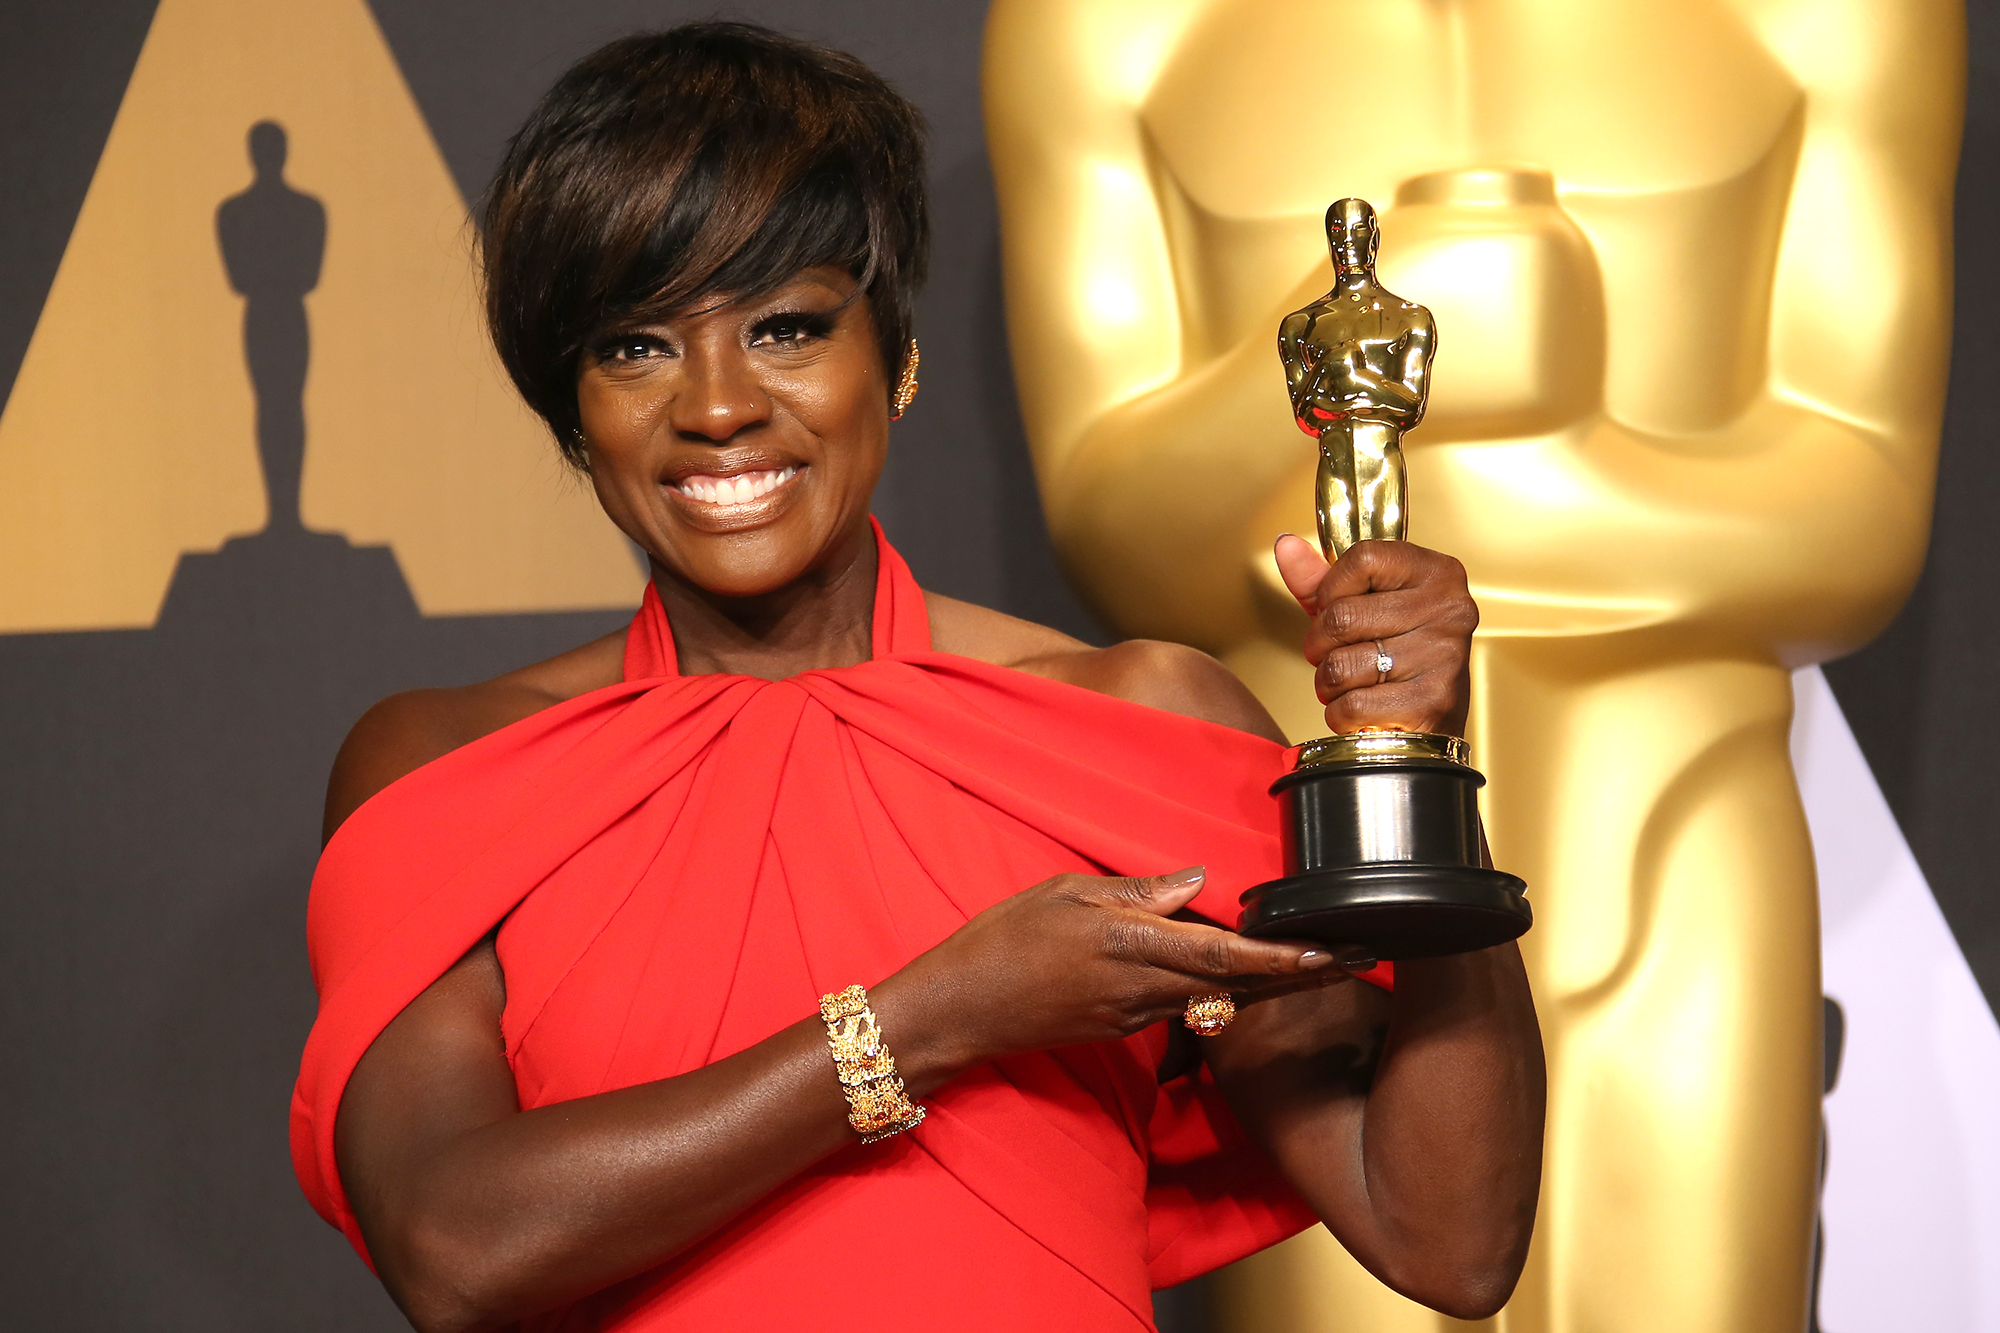 One of the actors rejected due to her looks: Viola Davis